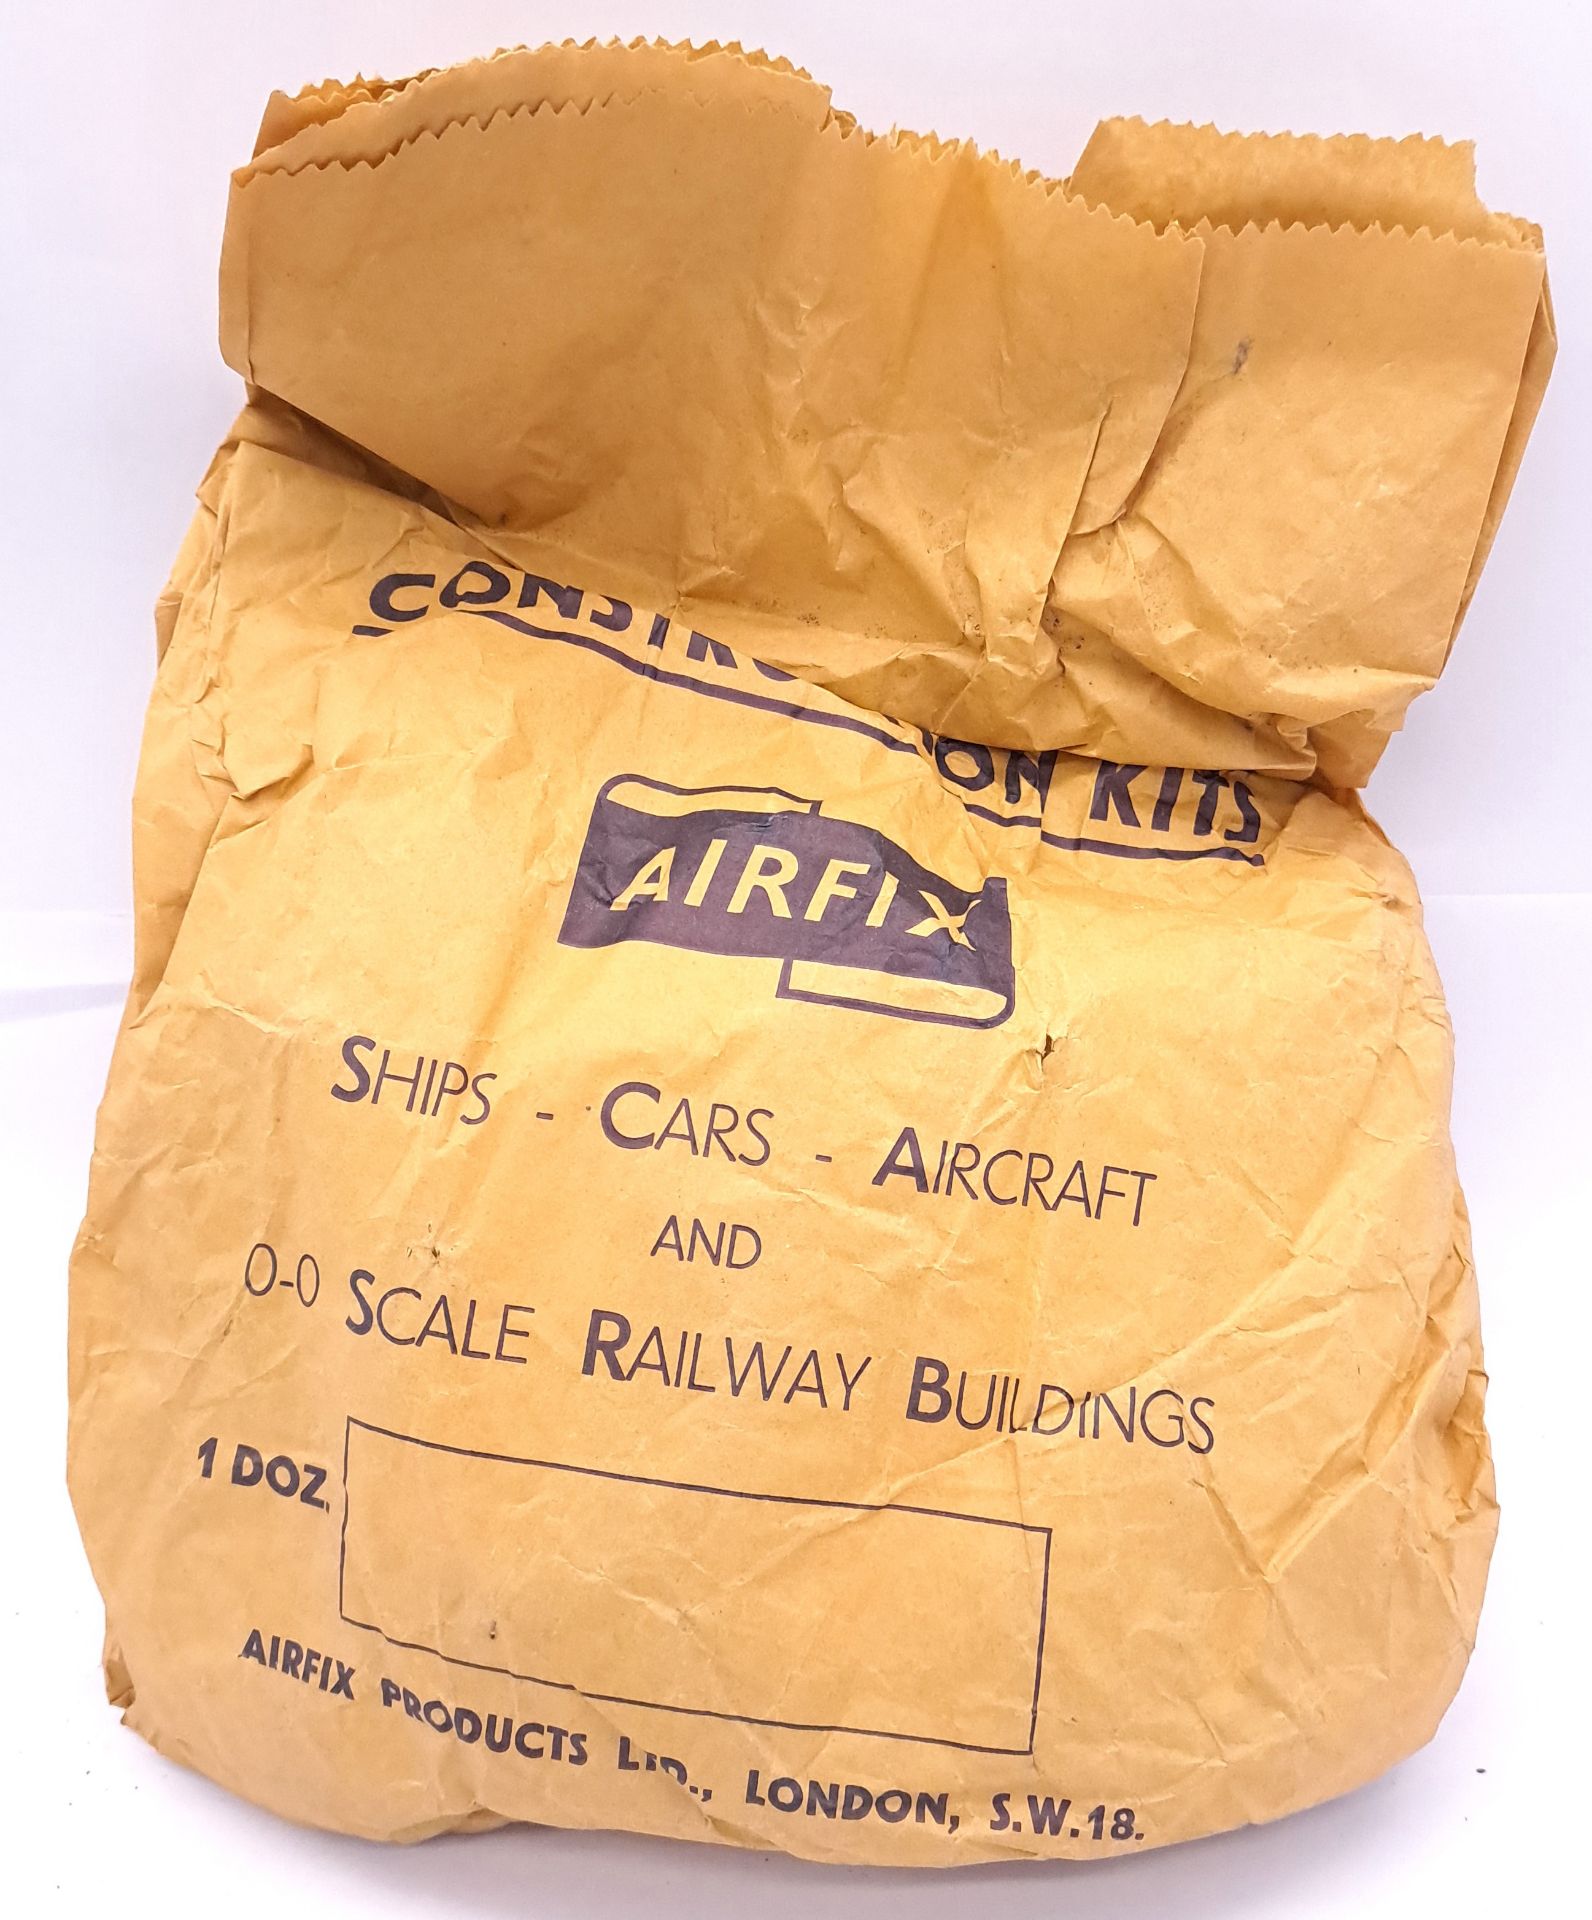 Airfix c1960’s ORIGINAL TRADE BAG complete with Bagged (possibly Type3) “Spitfire” Kits - Image 2 of 7